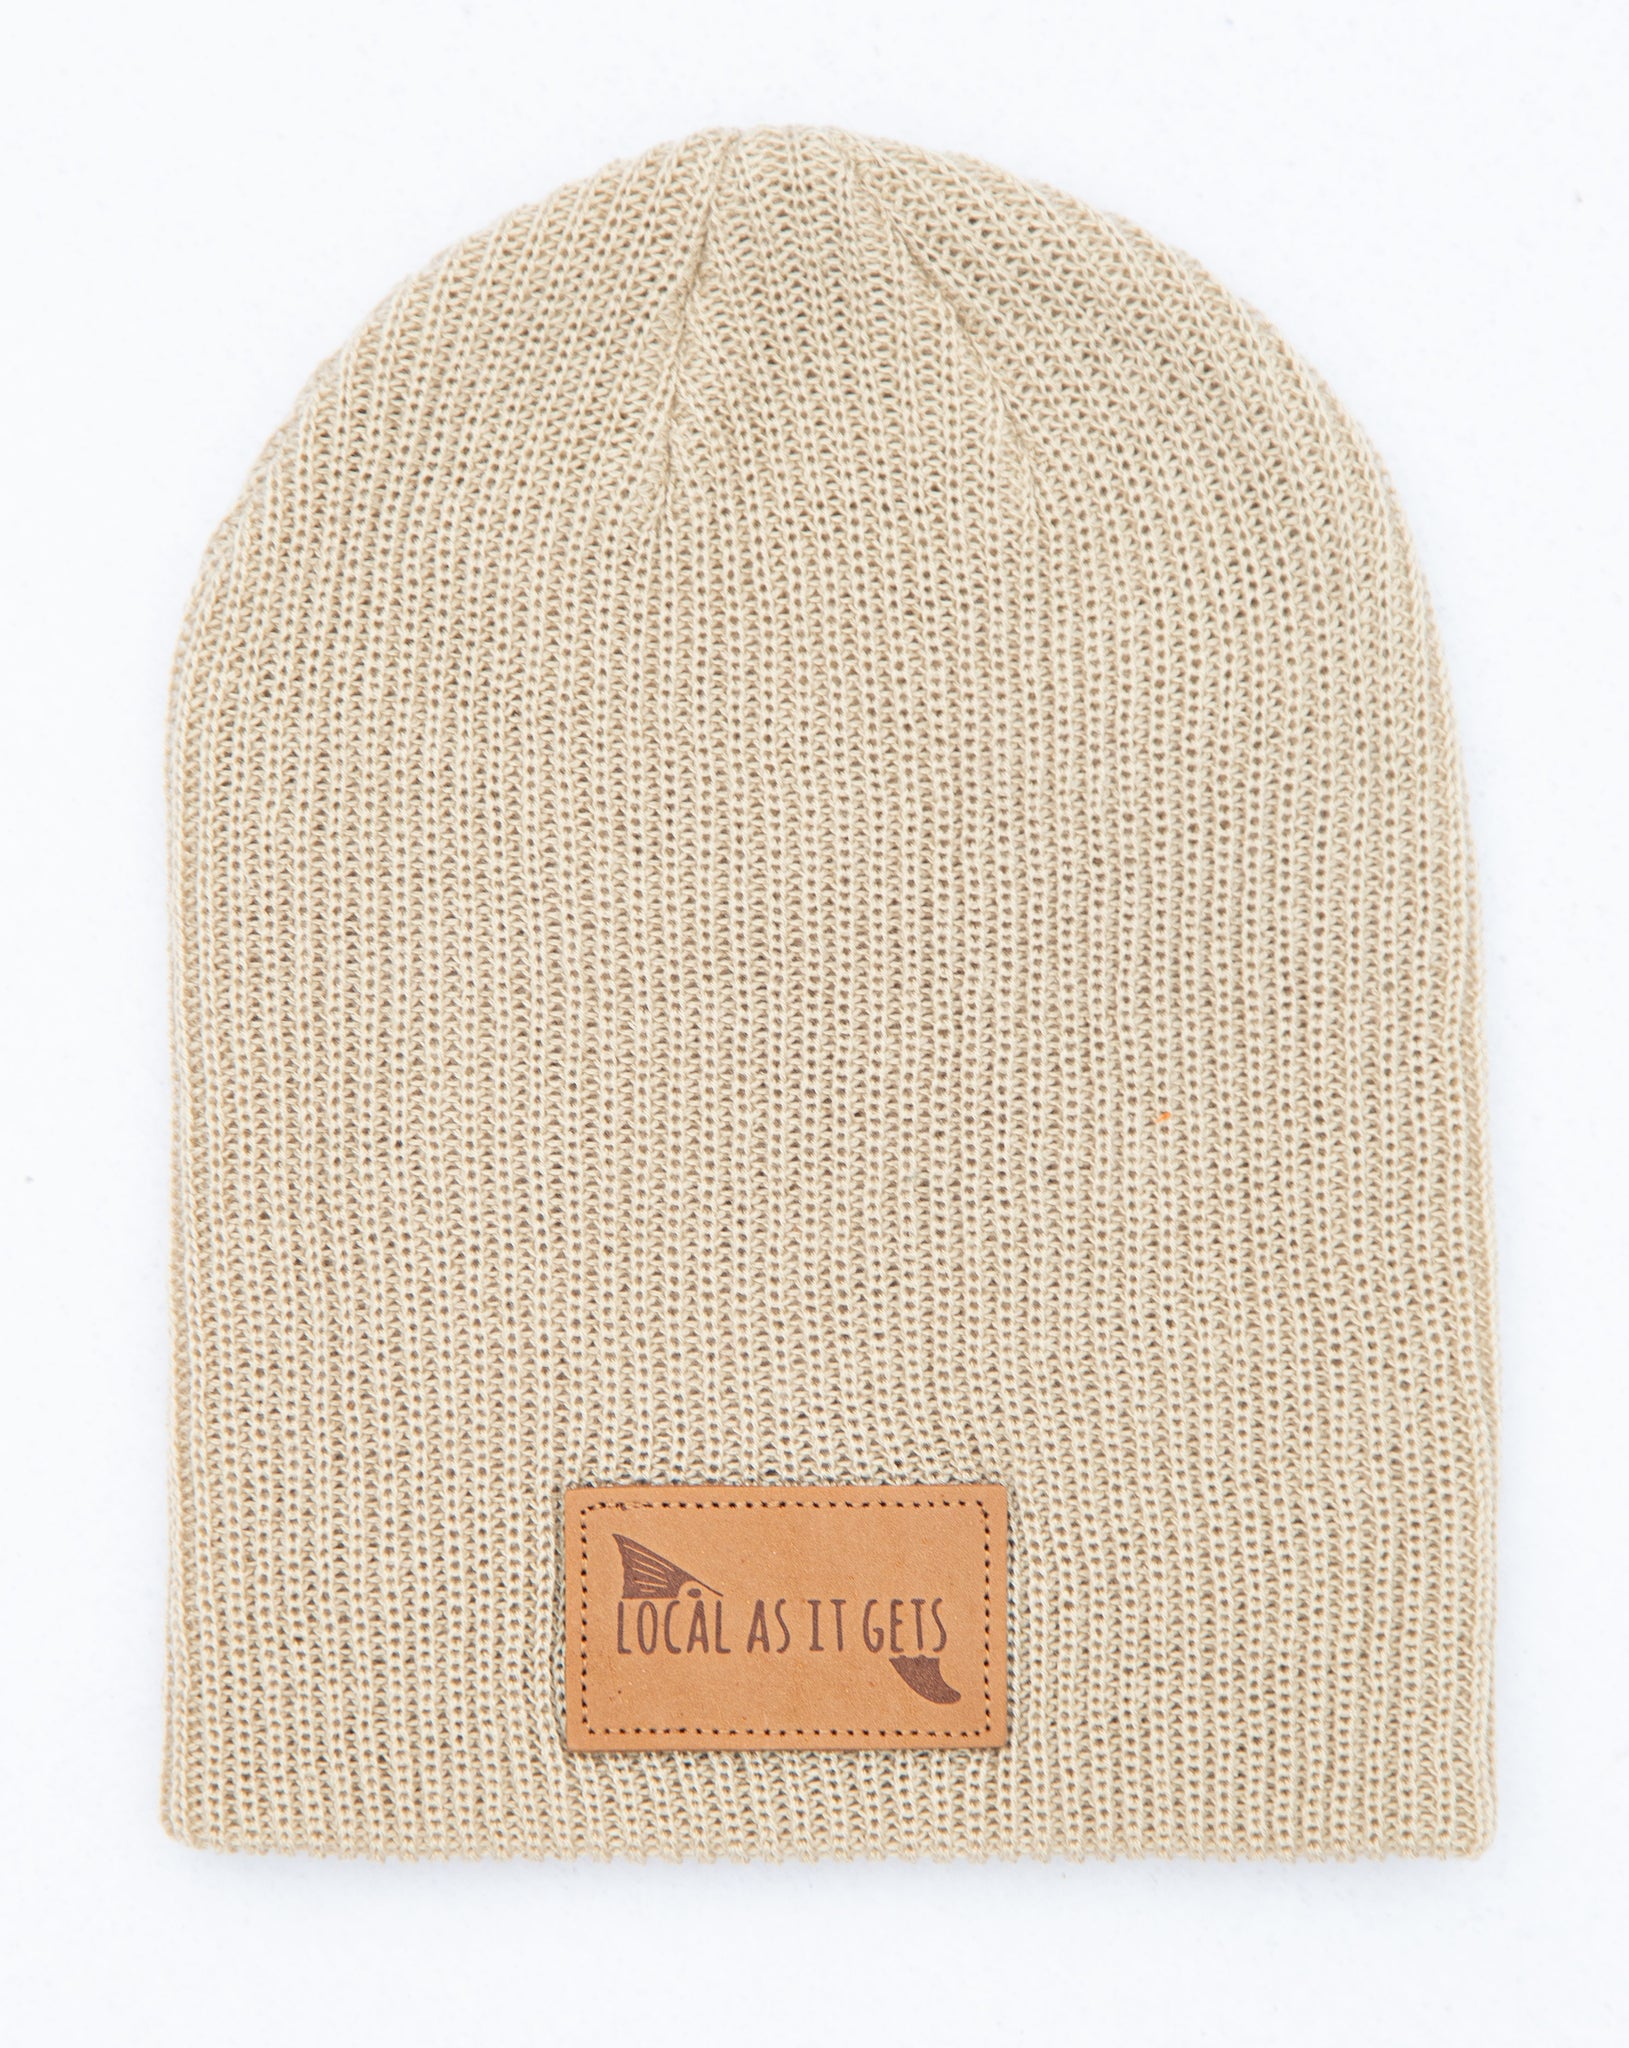 Fin & Fish Slouch Knit Beanie – Local As It Gets